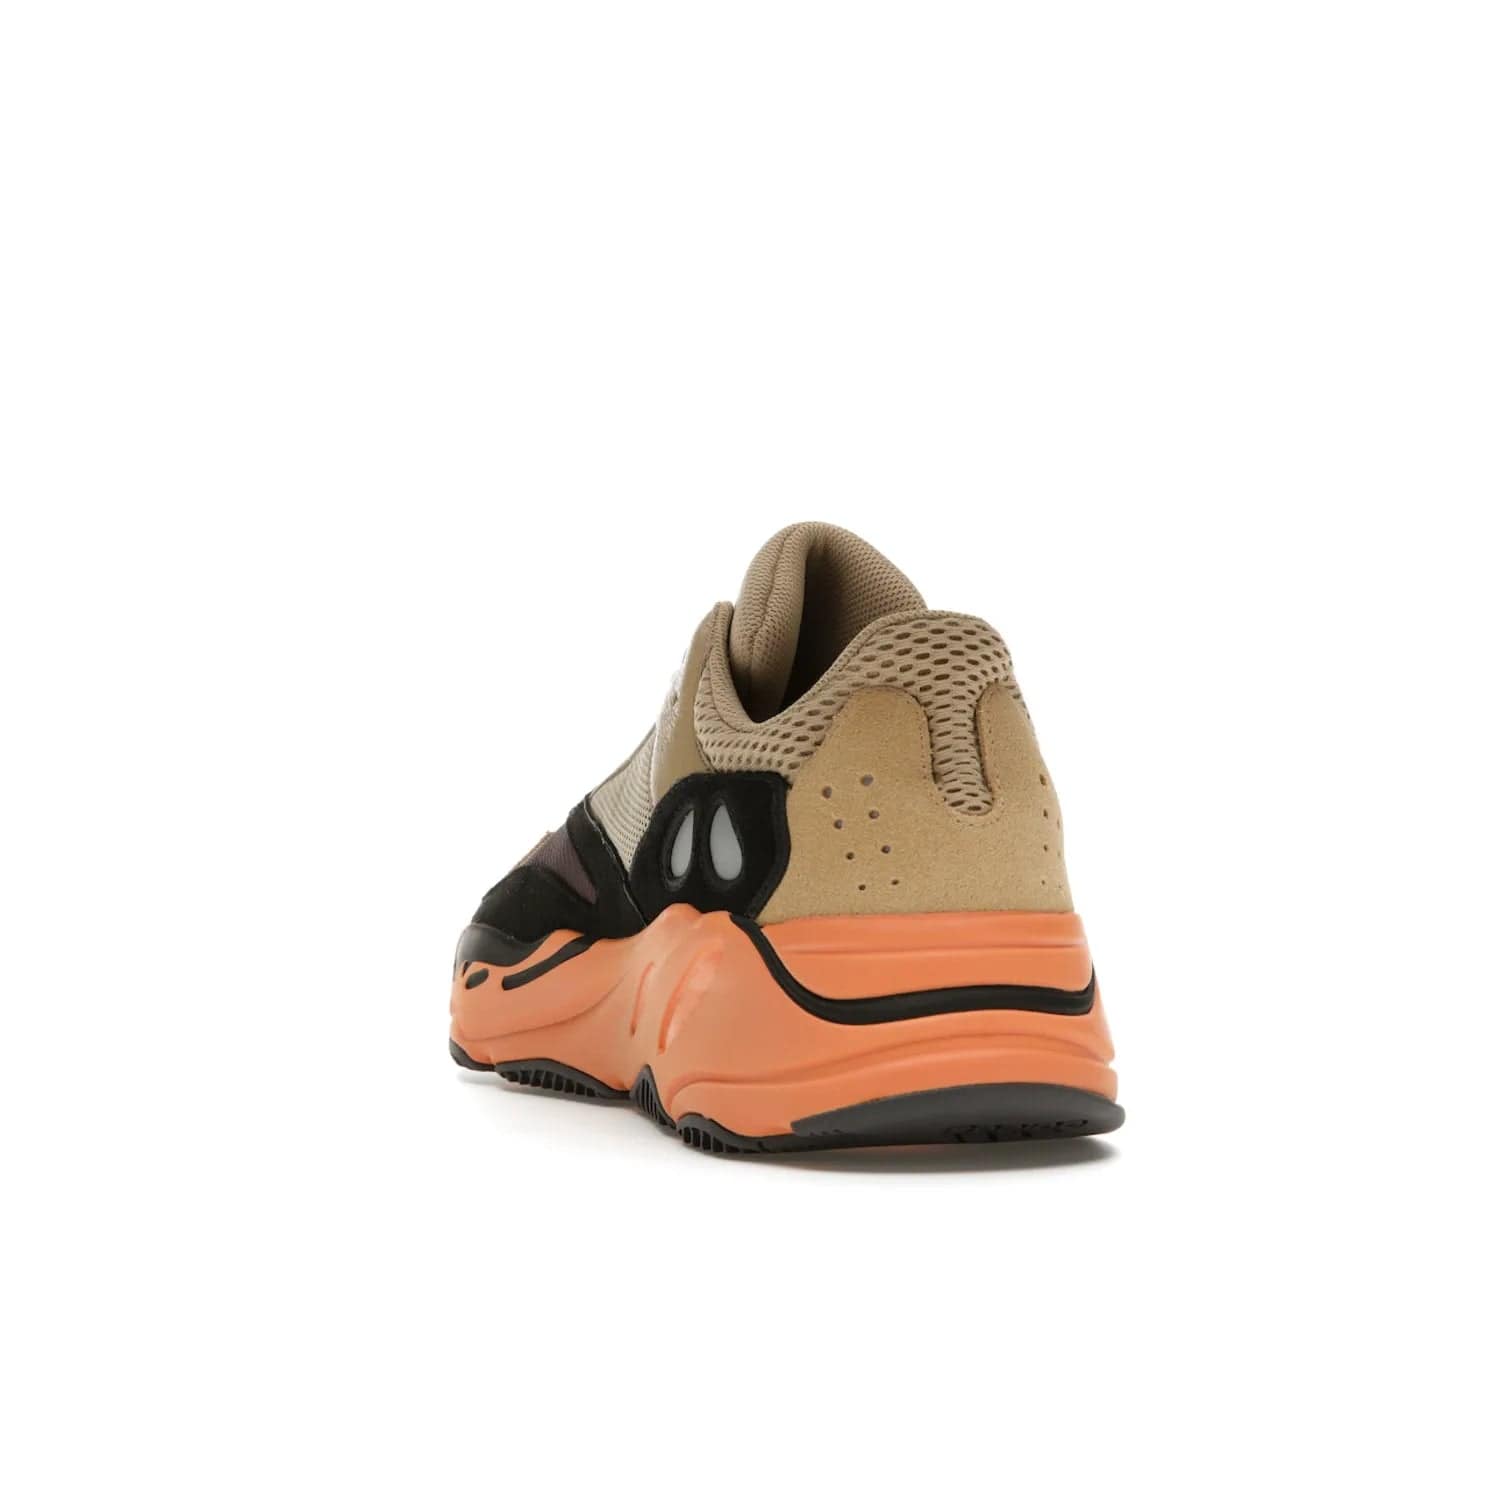 adidas Yeezy Boost 700 Enflame Amber - Image 26 - Only at www.BallersClubKickz.com - Adidas Yeezy Boost 700 Enflame Amber: Eye-catching design with pale yellow, brown, teal, and orange! Get yours in June 2021.